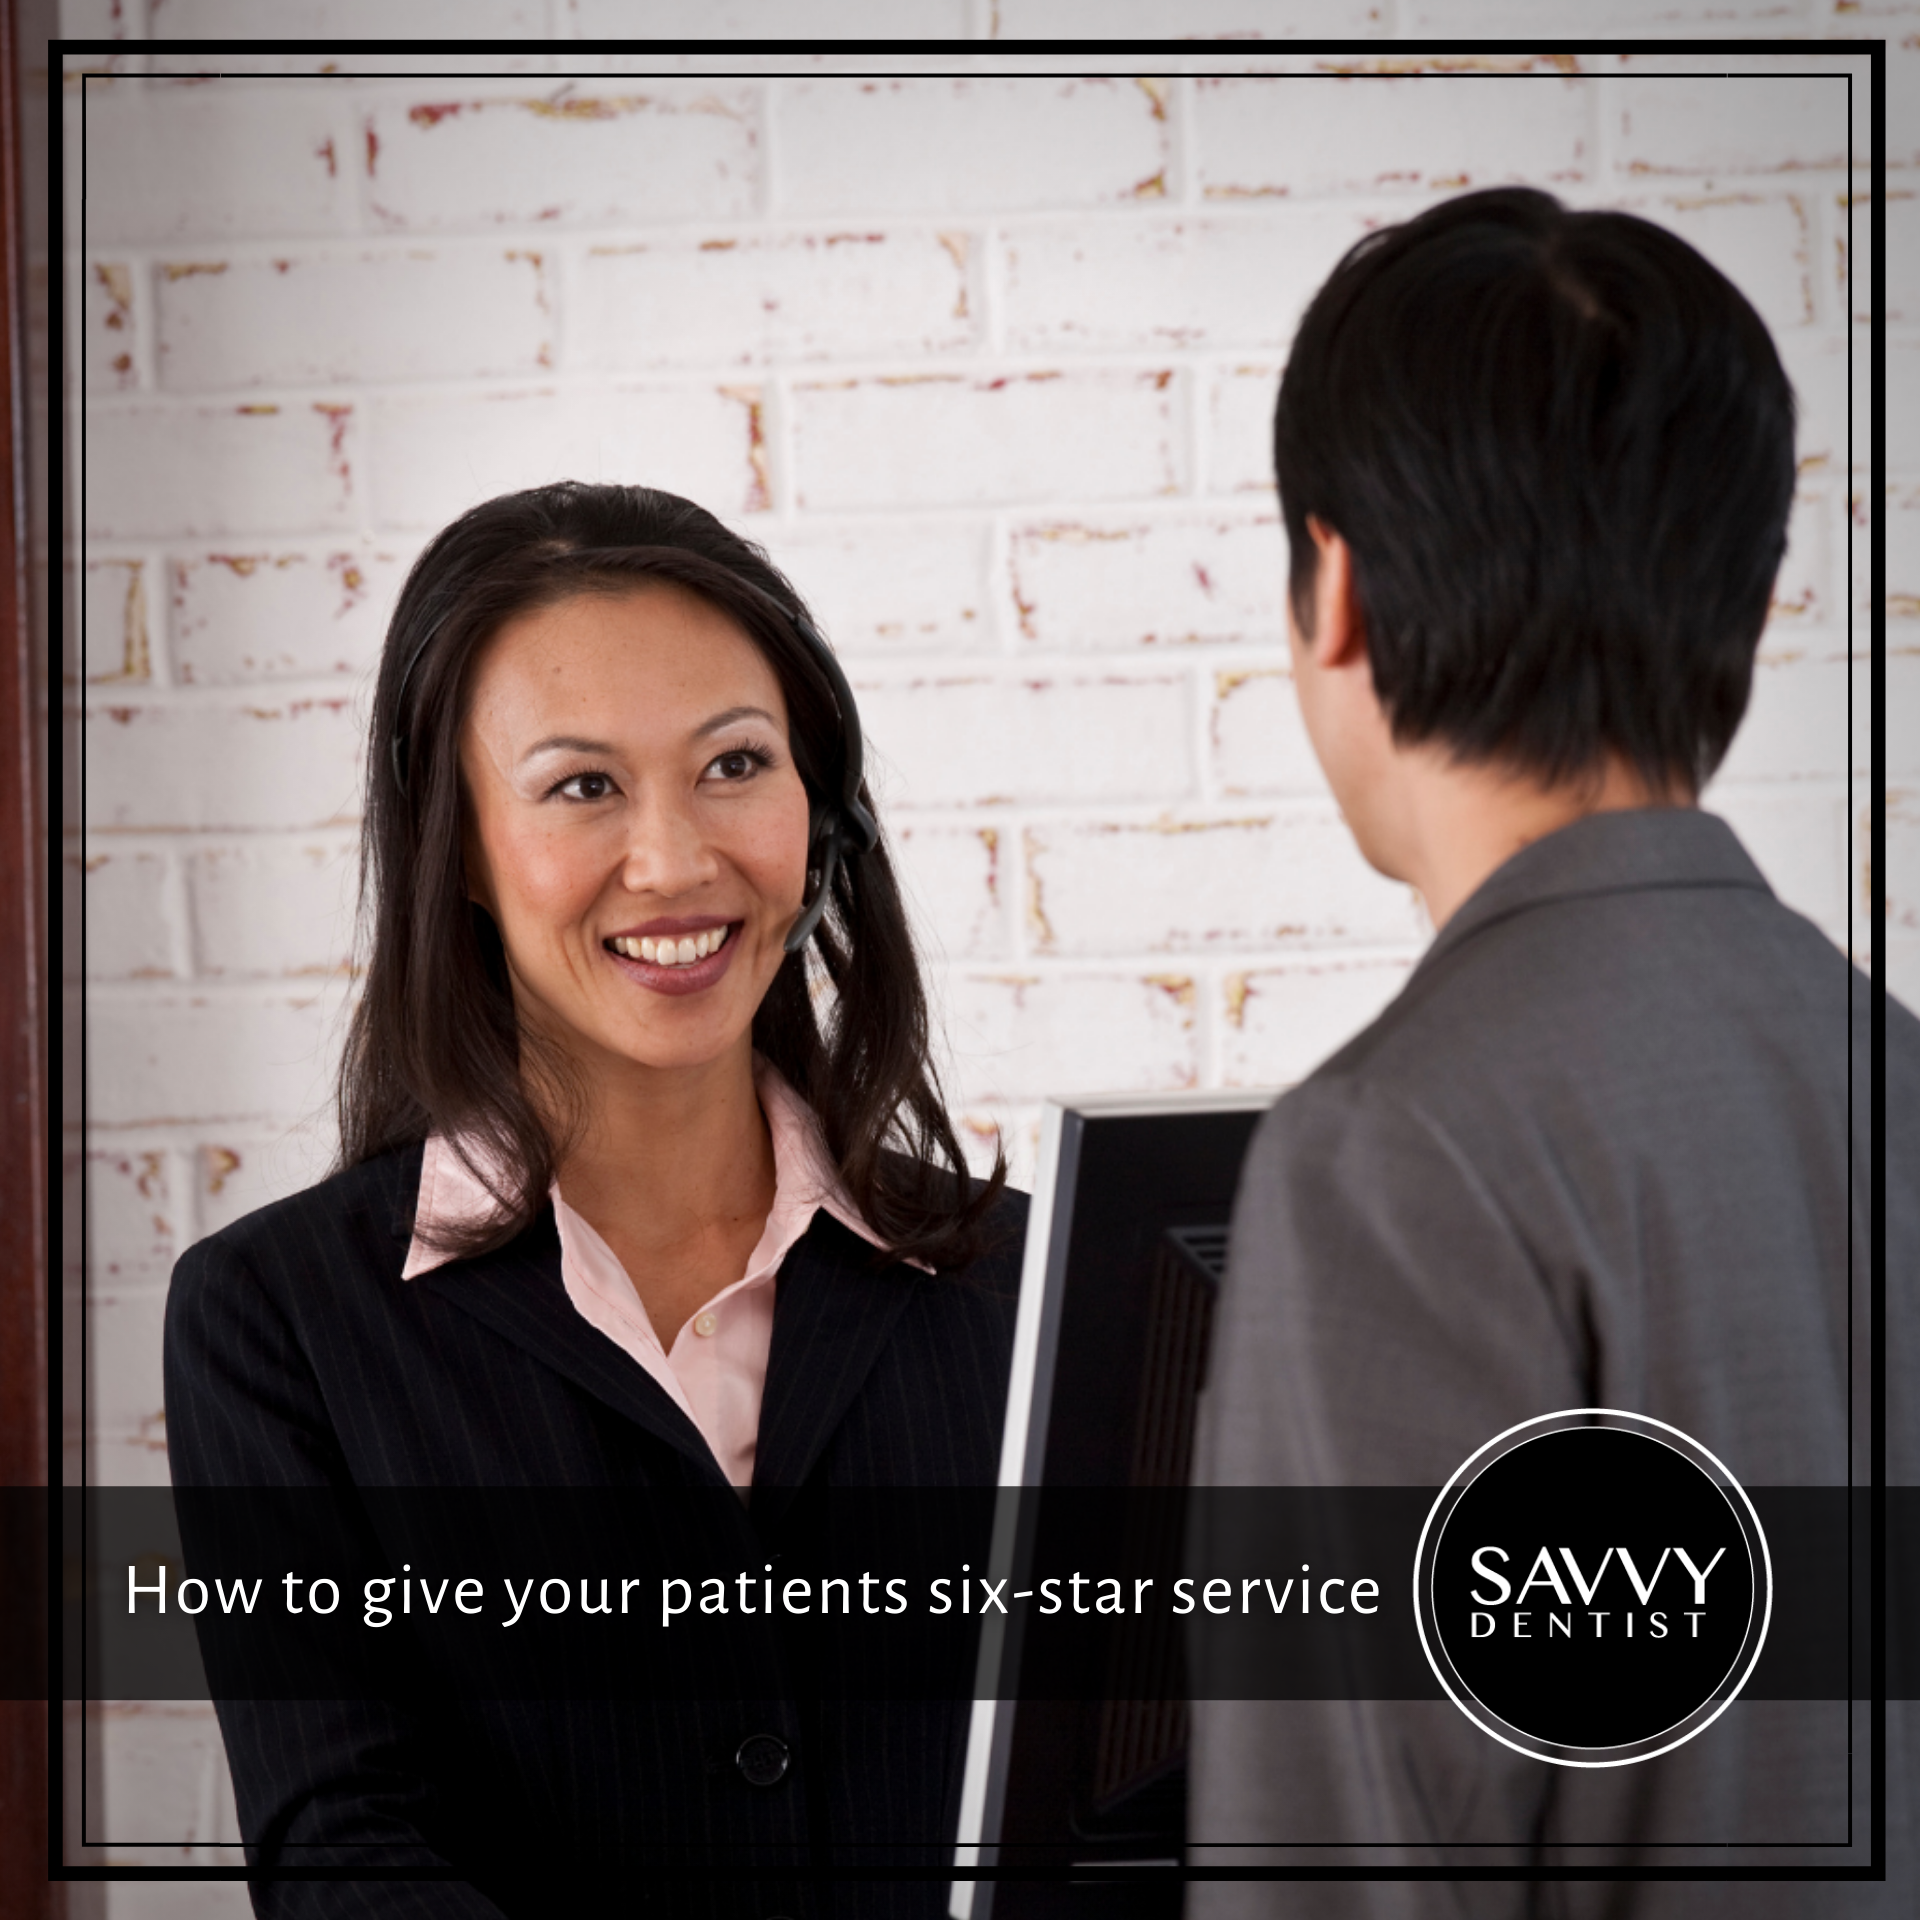 How to give your patients six-star service